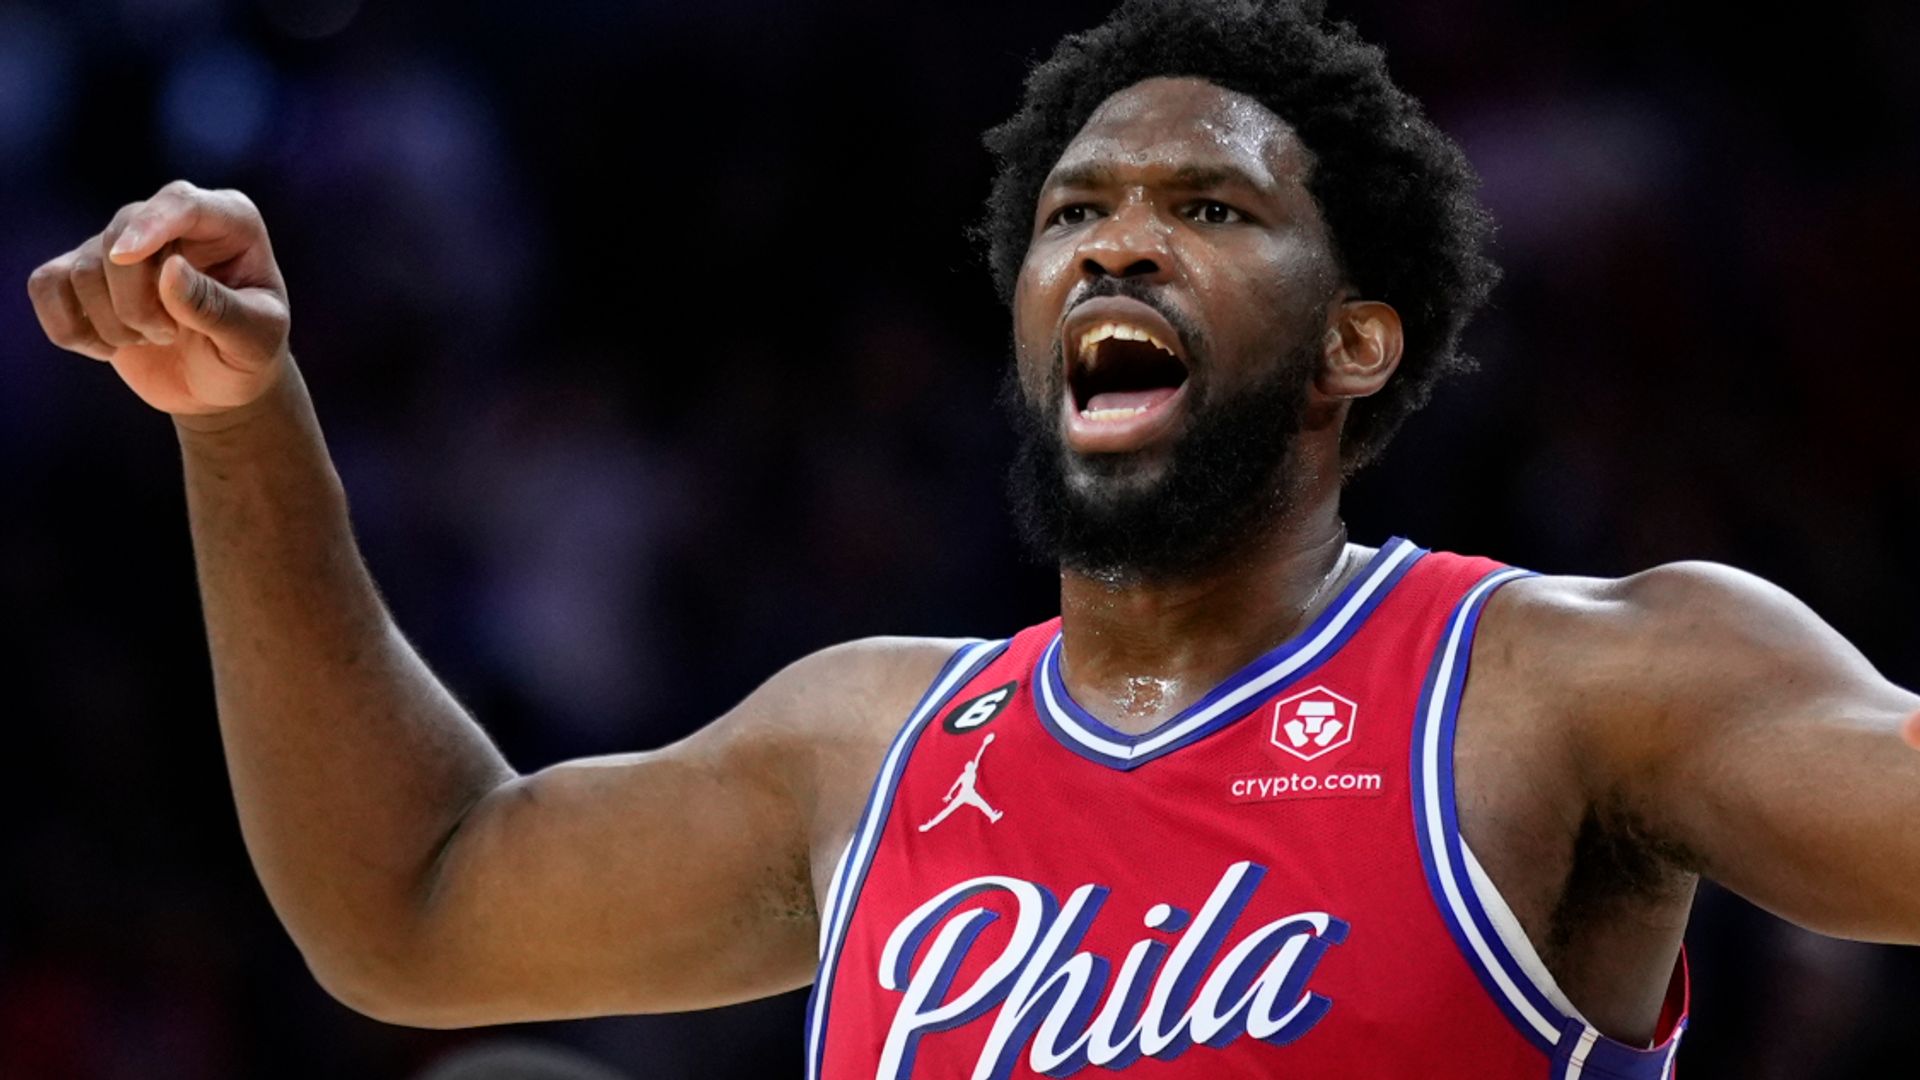 NBA round-up: Embiid hits game-winner for 76ers | Lakers win third straight